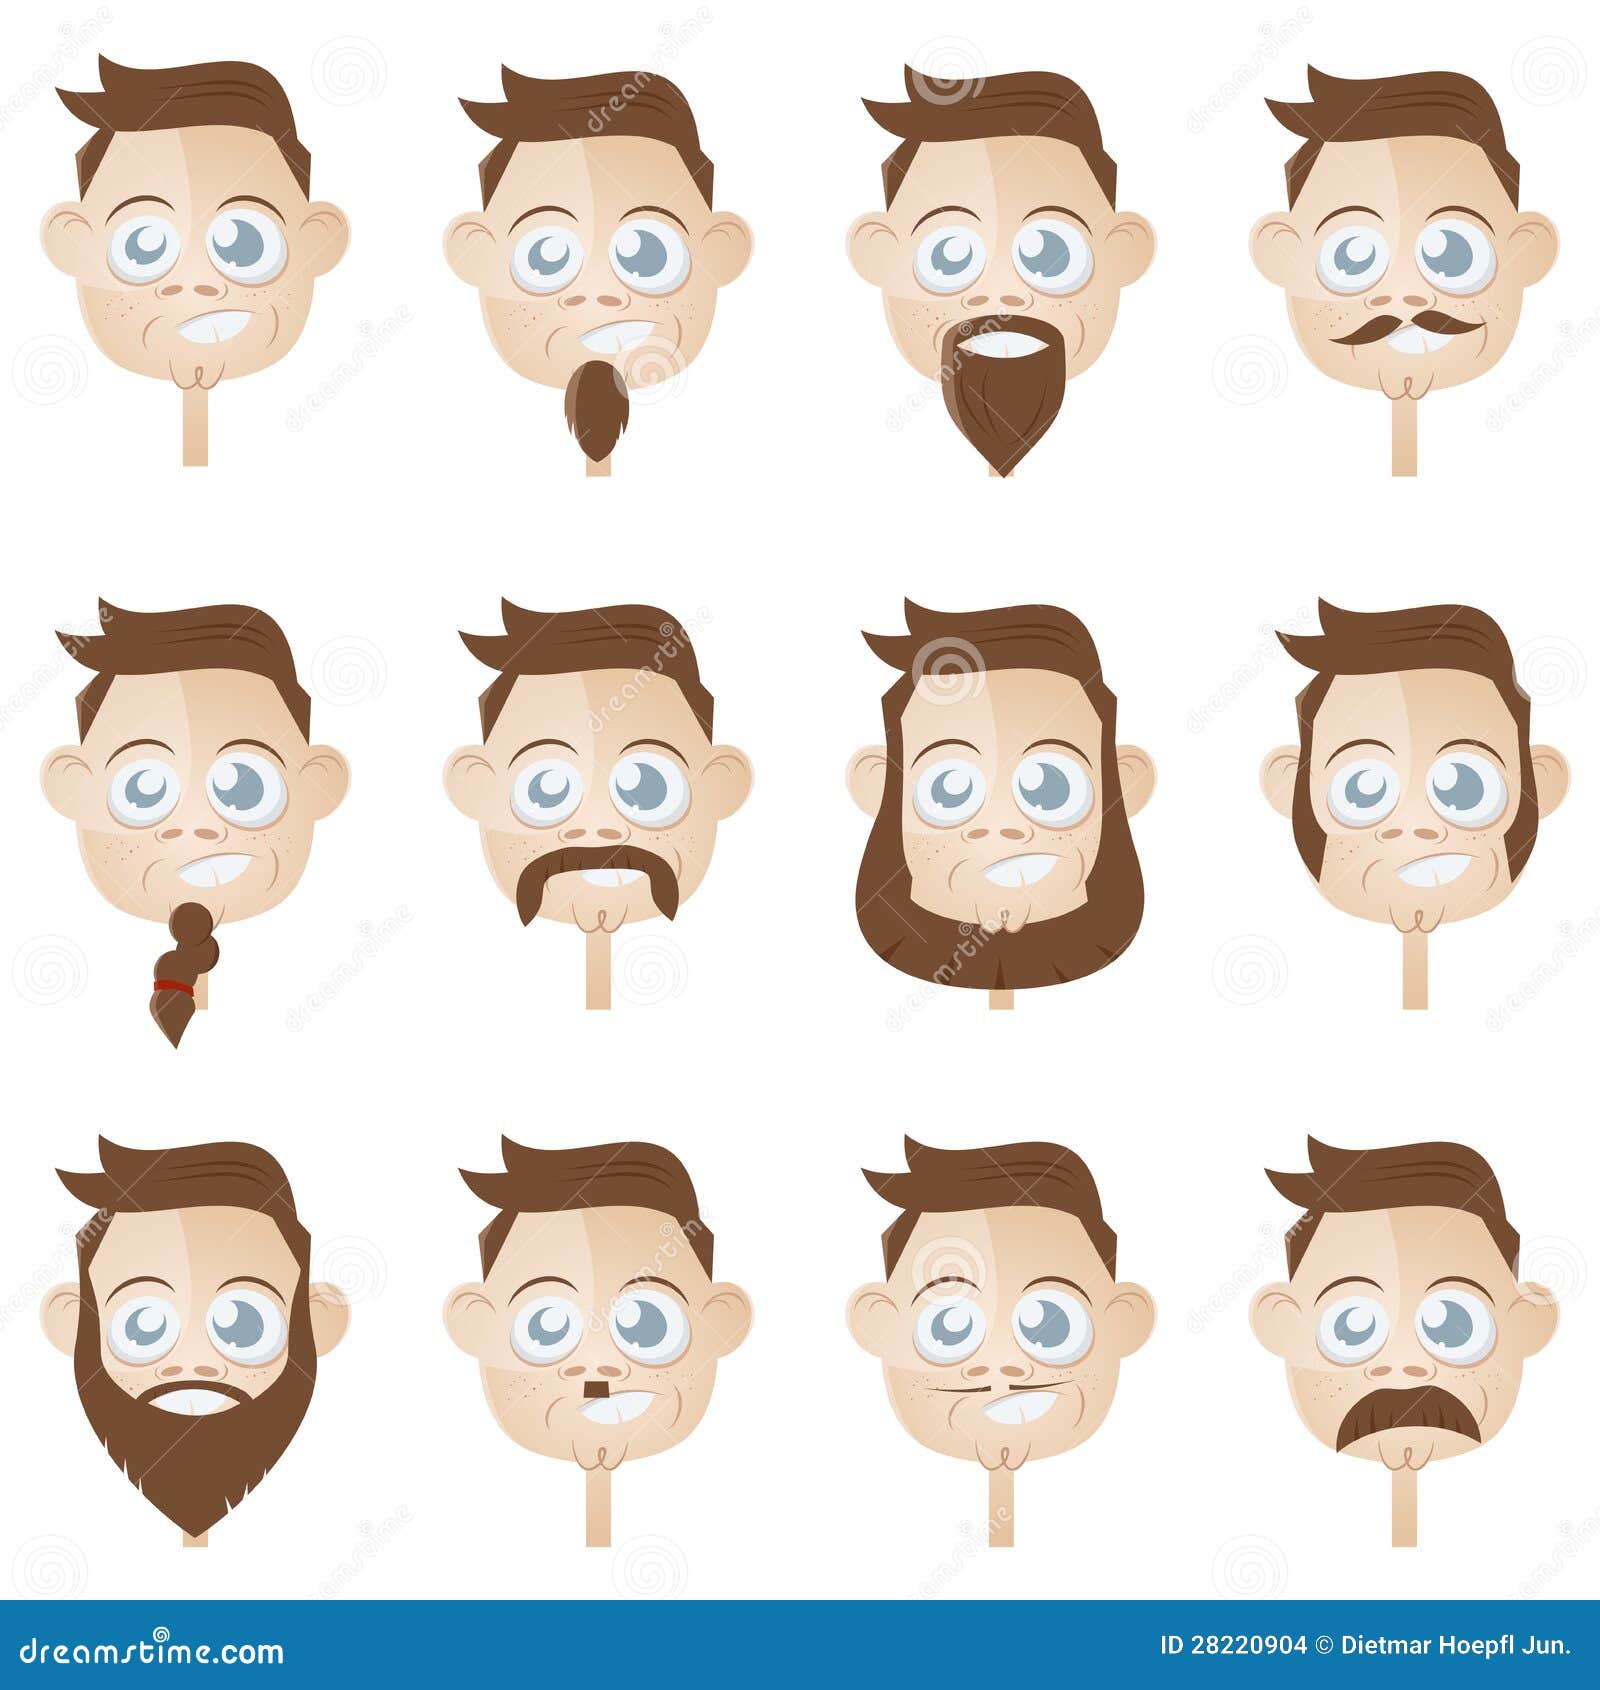 Beard Head Collection Stock Images - Image: 28220904